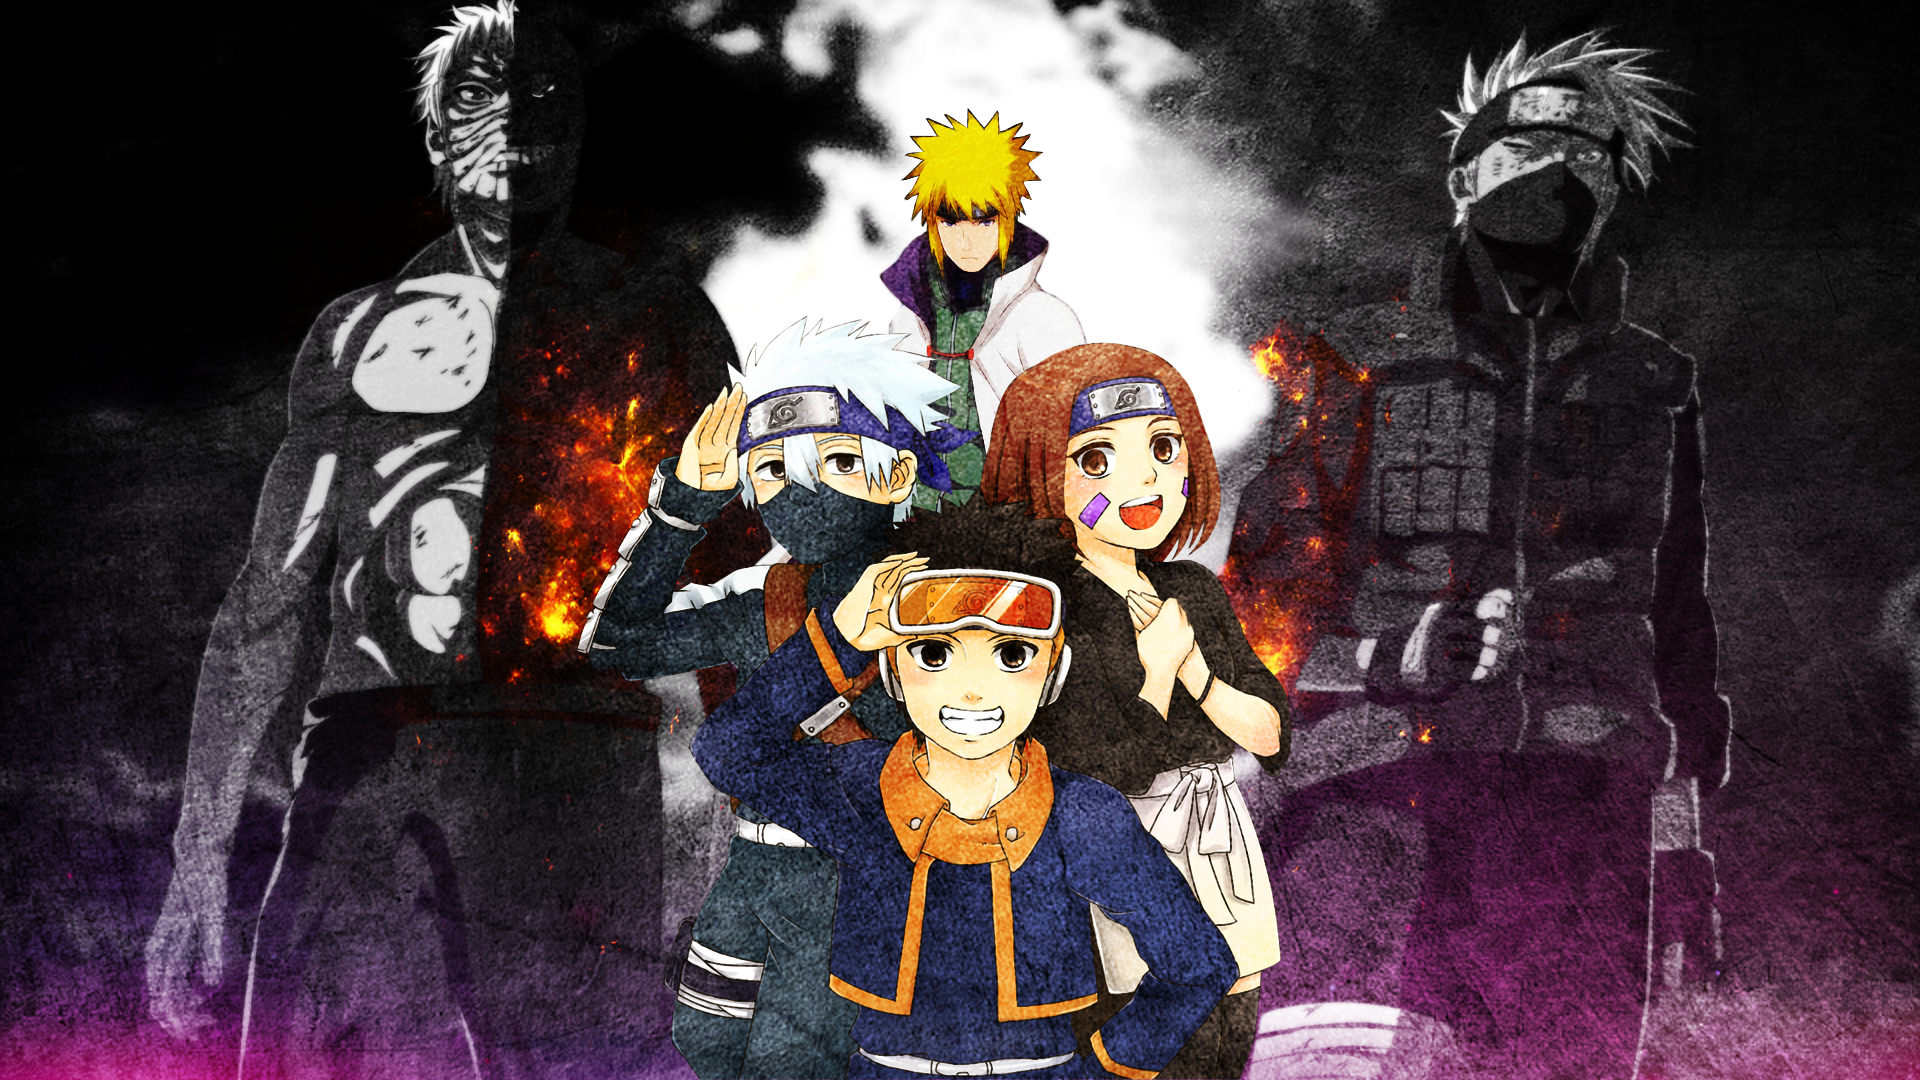 Naruto HD Wallpaper | Achtergrond | 1920x1080 | ID:970172 - Wallpaper Abyss